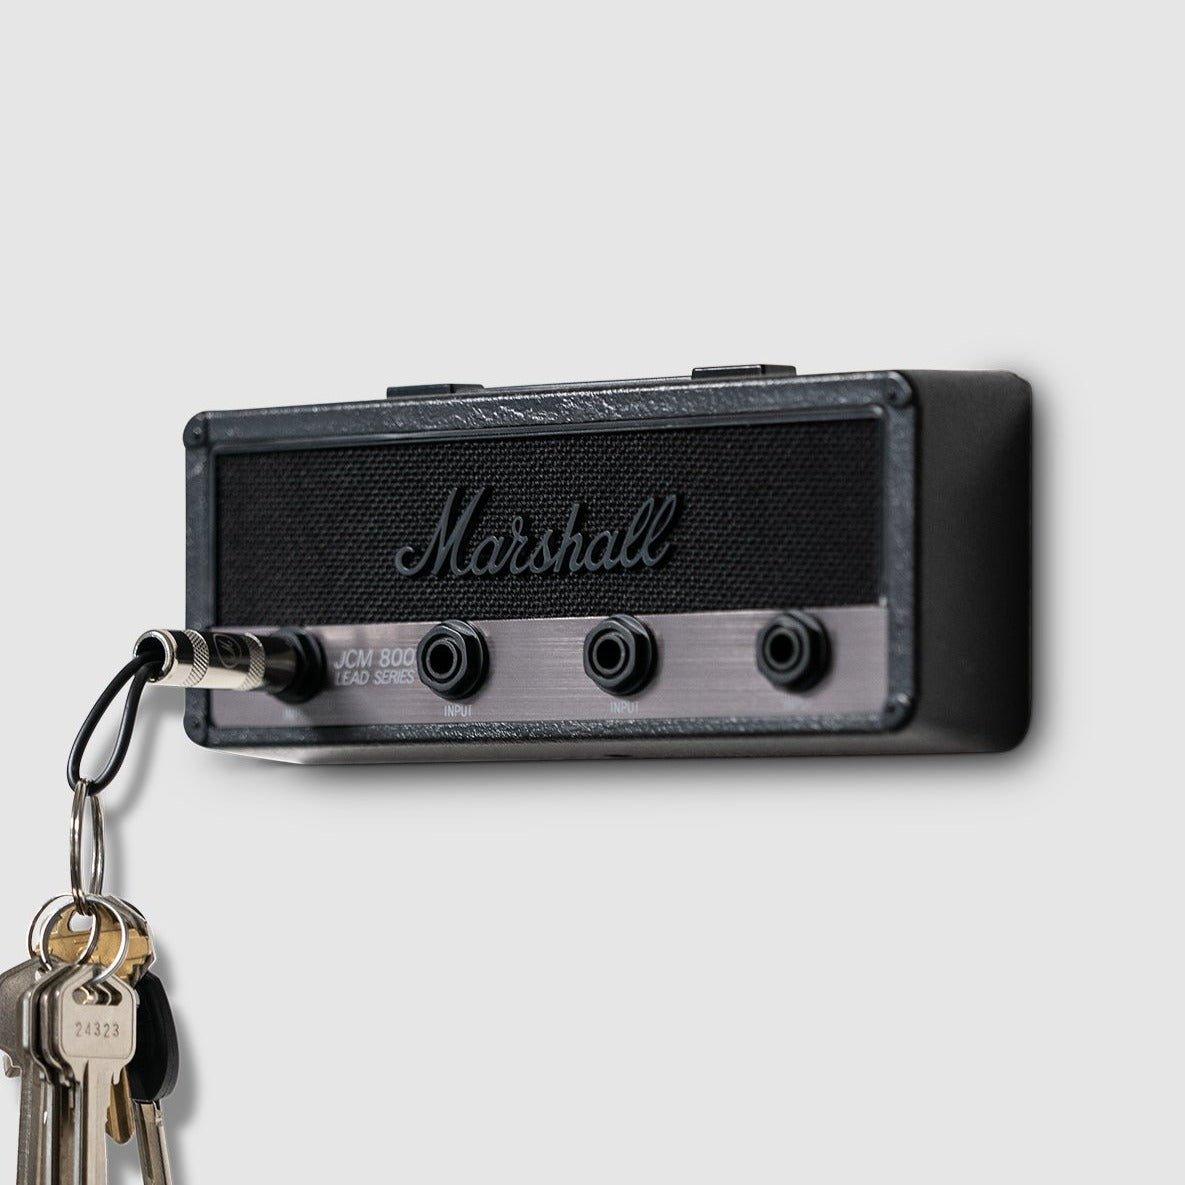 Retro Home Decoration: Wall Mount Key Hanger with 4 Plugs for Guitars & Keychains